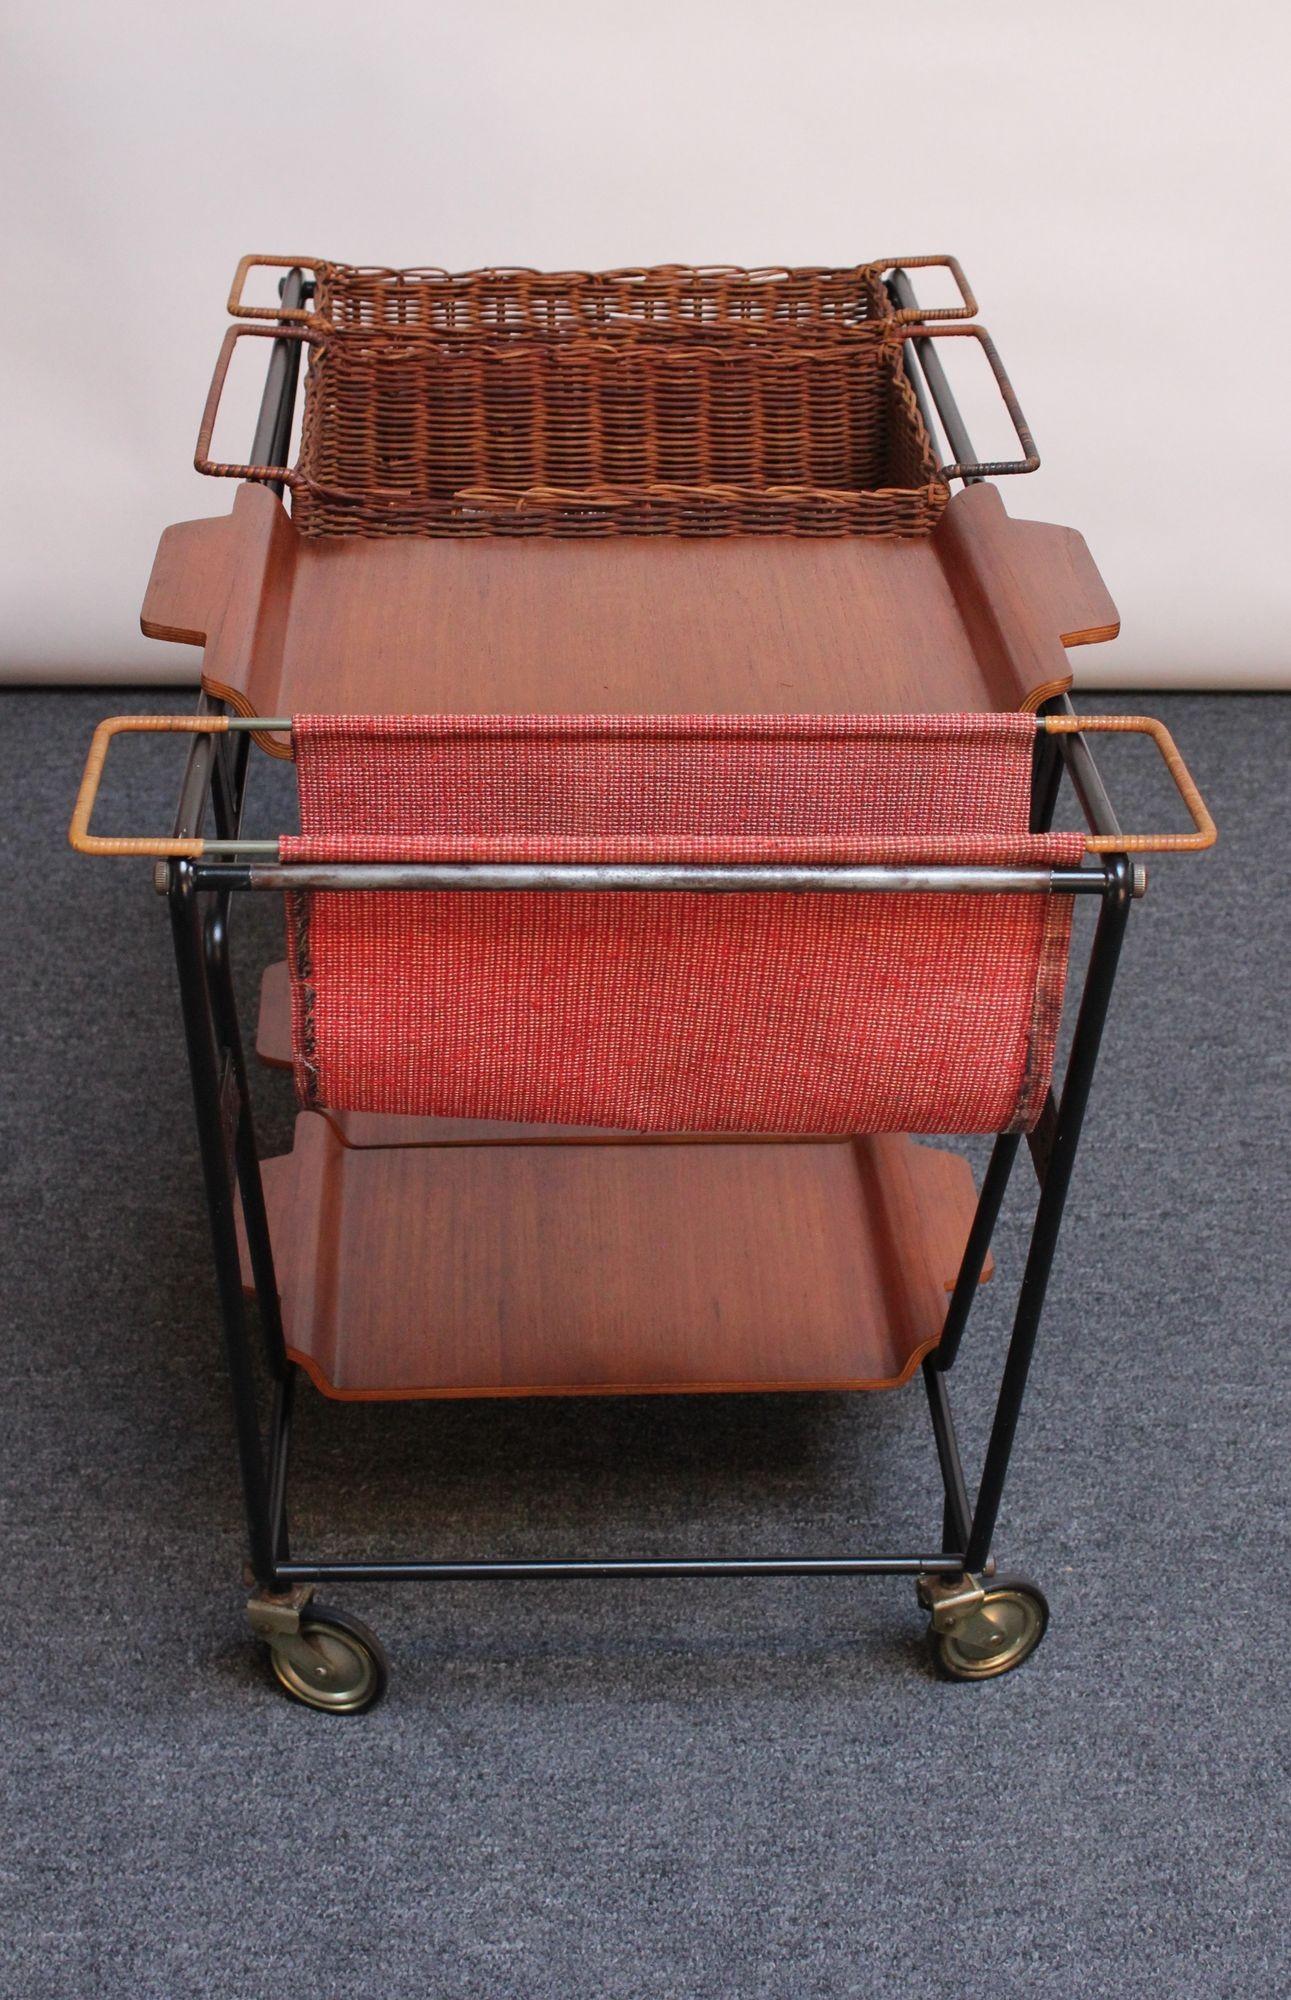 Italian Modernist Iron Bar Cart / Trolley with Plywood and Wicker Inserts In Good Condition For Sale In Brooklyn, NY